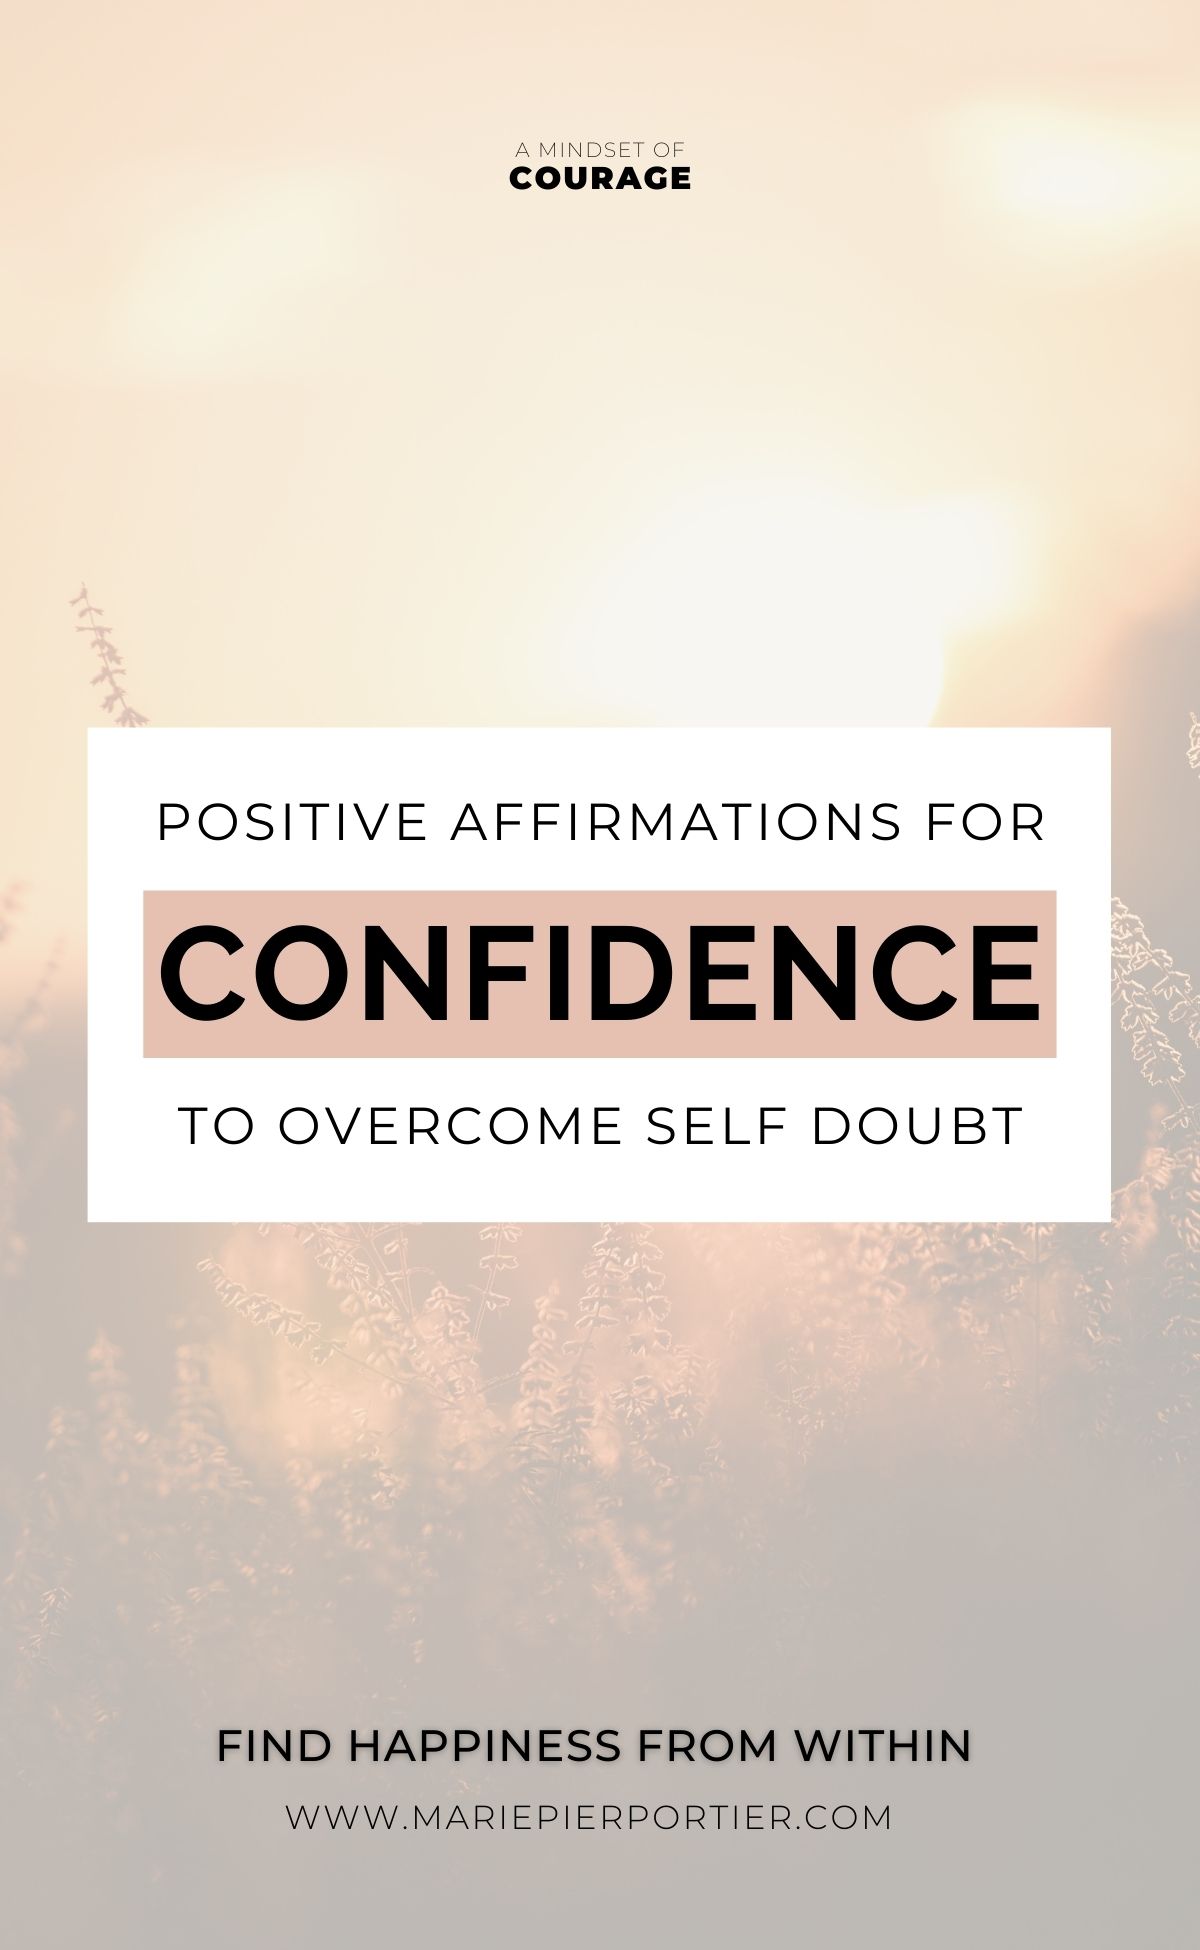 21 Positive Affirmations to Increase Confidence and Overcome Self Doubt